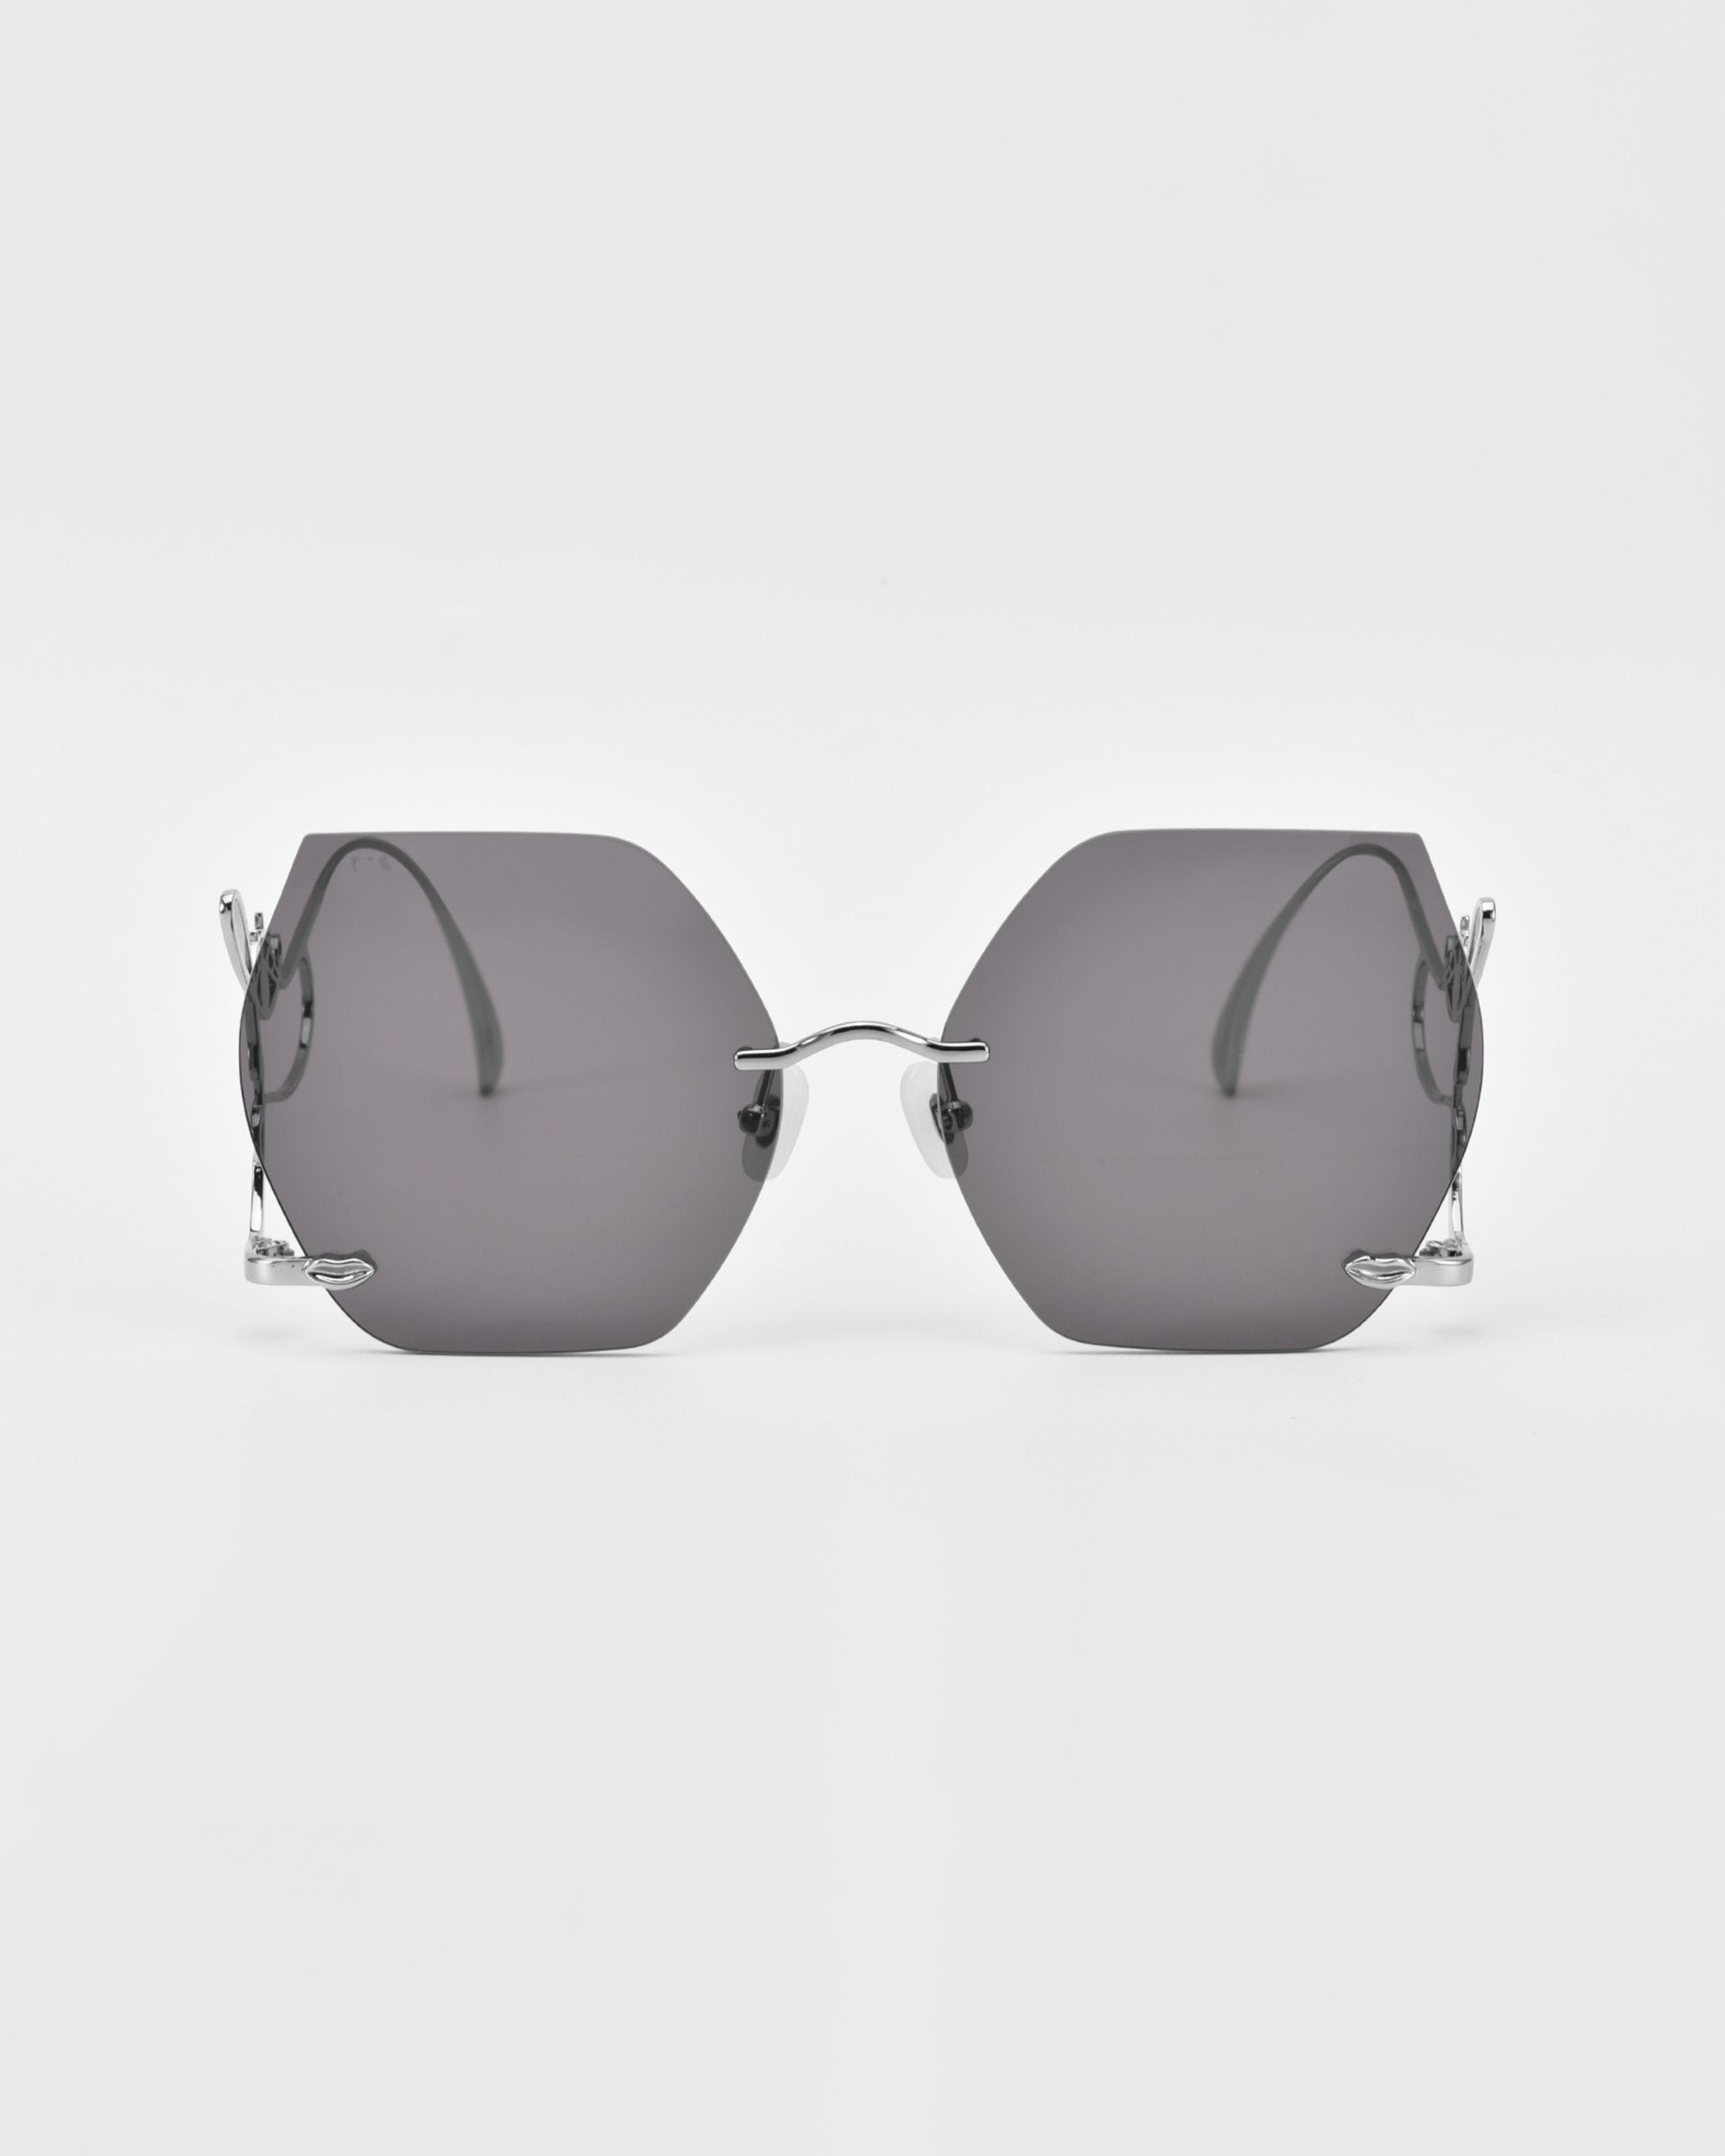 A pair of stylish, rimless, hexagon-shaped sunglasses with dark tinted lenses and thin metal arms. These limited edition Cry Me a River sunglasses by For Art&#39;s Sake® stand out against the white background, highlighting their sleek design and modern aesthetic.